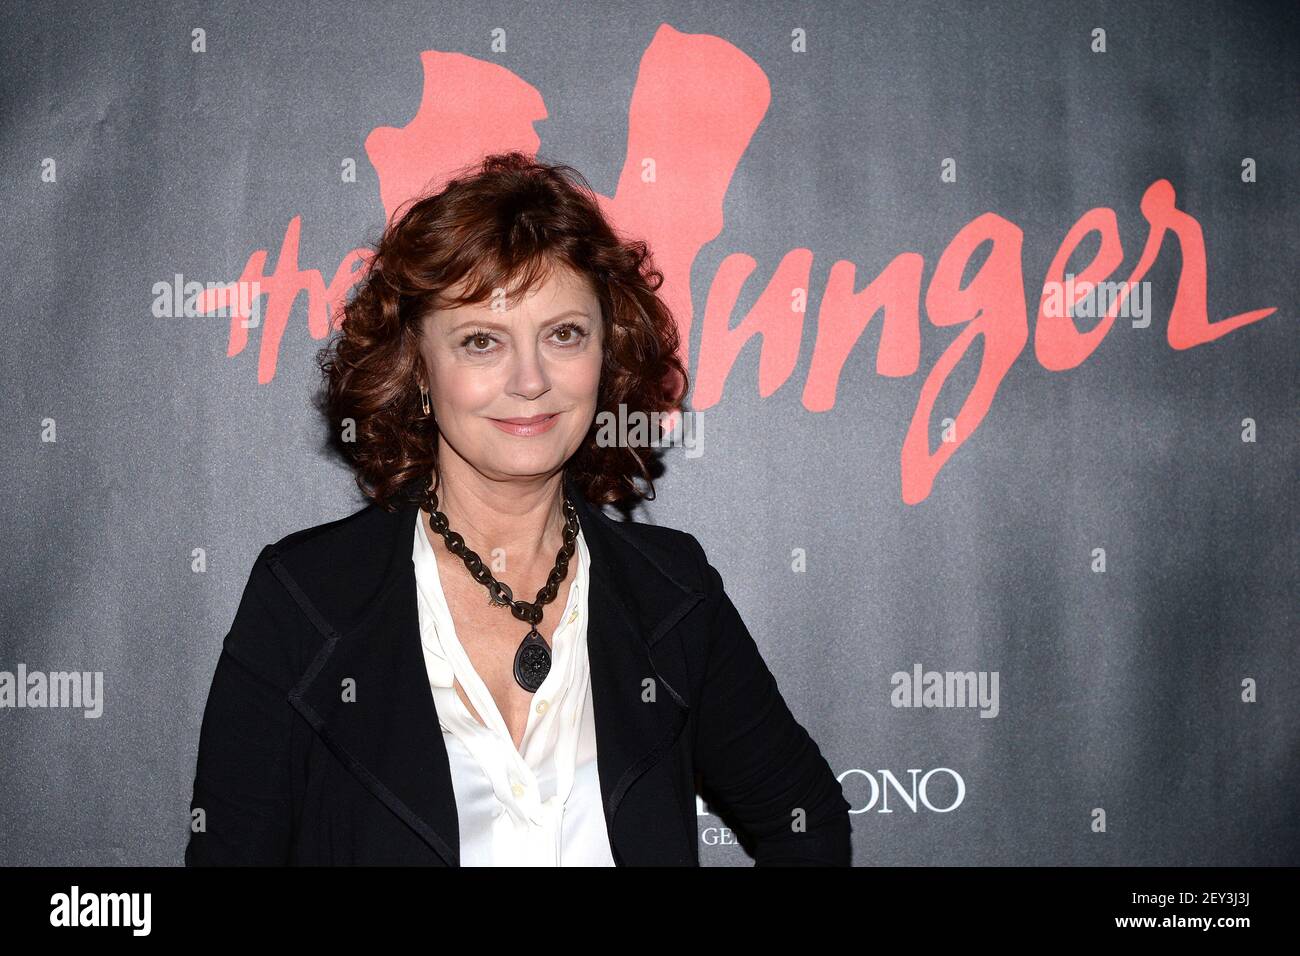 Actress Susan Sarandon hosts a private screening of late director Tony Scott's "The Hunger" at the Museum of Modern Art (MoMa) in New York, NY, on October 8, 2014. (Photo by Anthony Behar/Sipa USA) Stock Photo